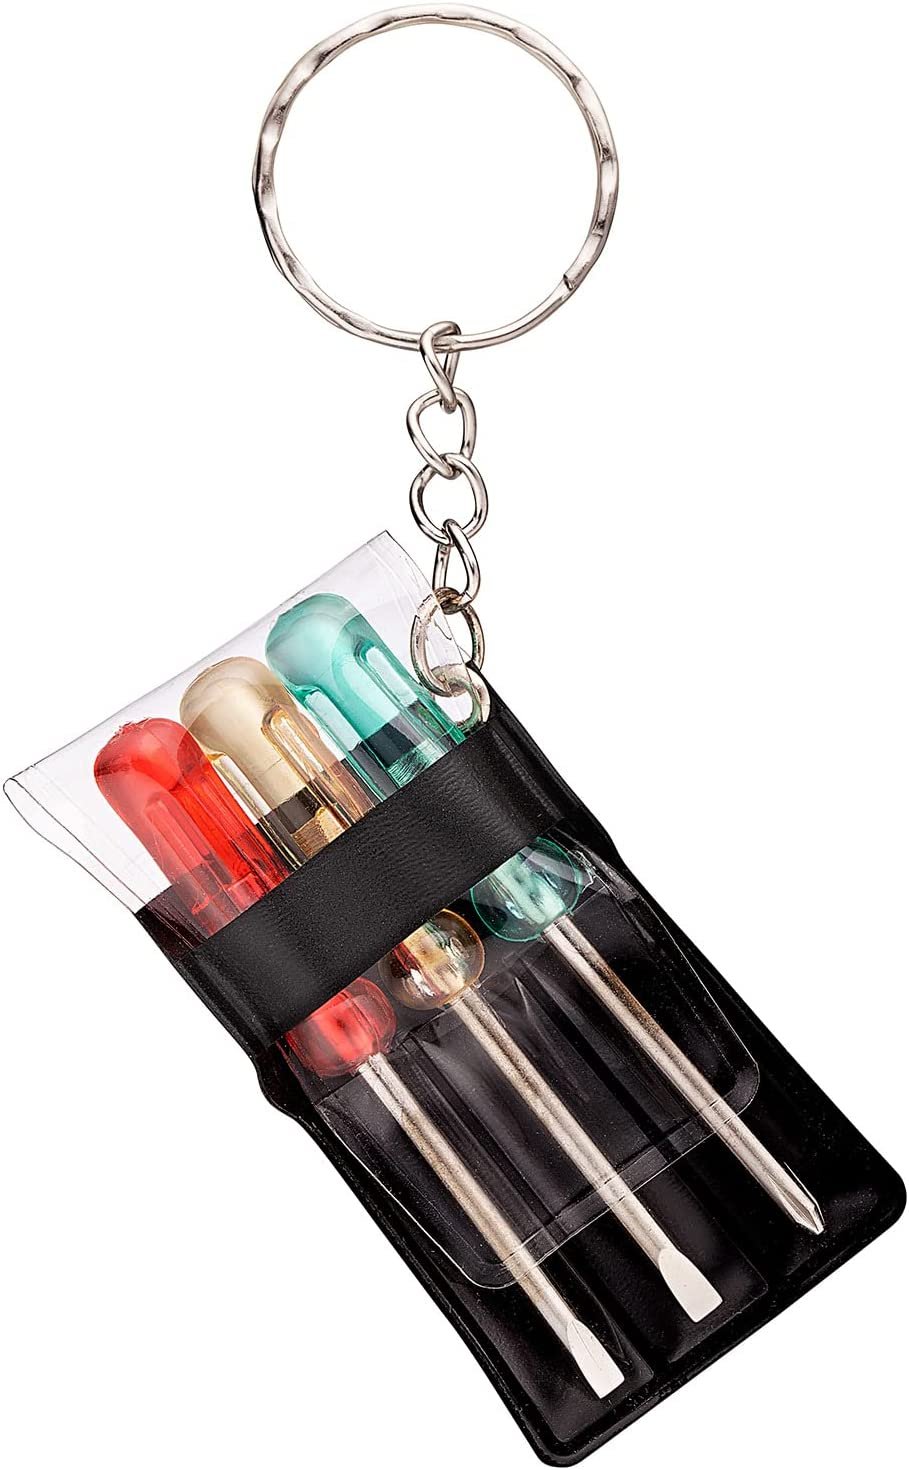 Mini Screwdriver Set with Keychain - Set of 12 - Each Set Includes 3 Screw Drivers in a Portable Pouch - Cool Party Favor - Goodie Bag Filler